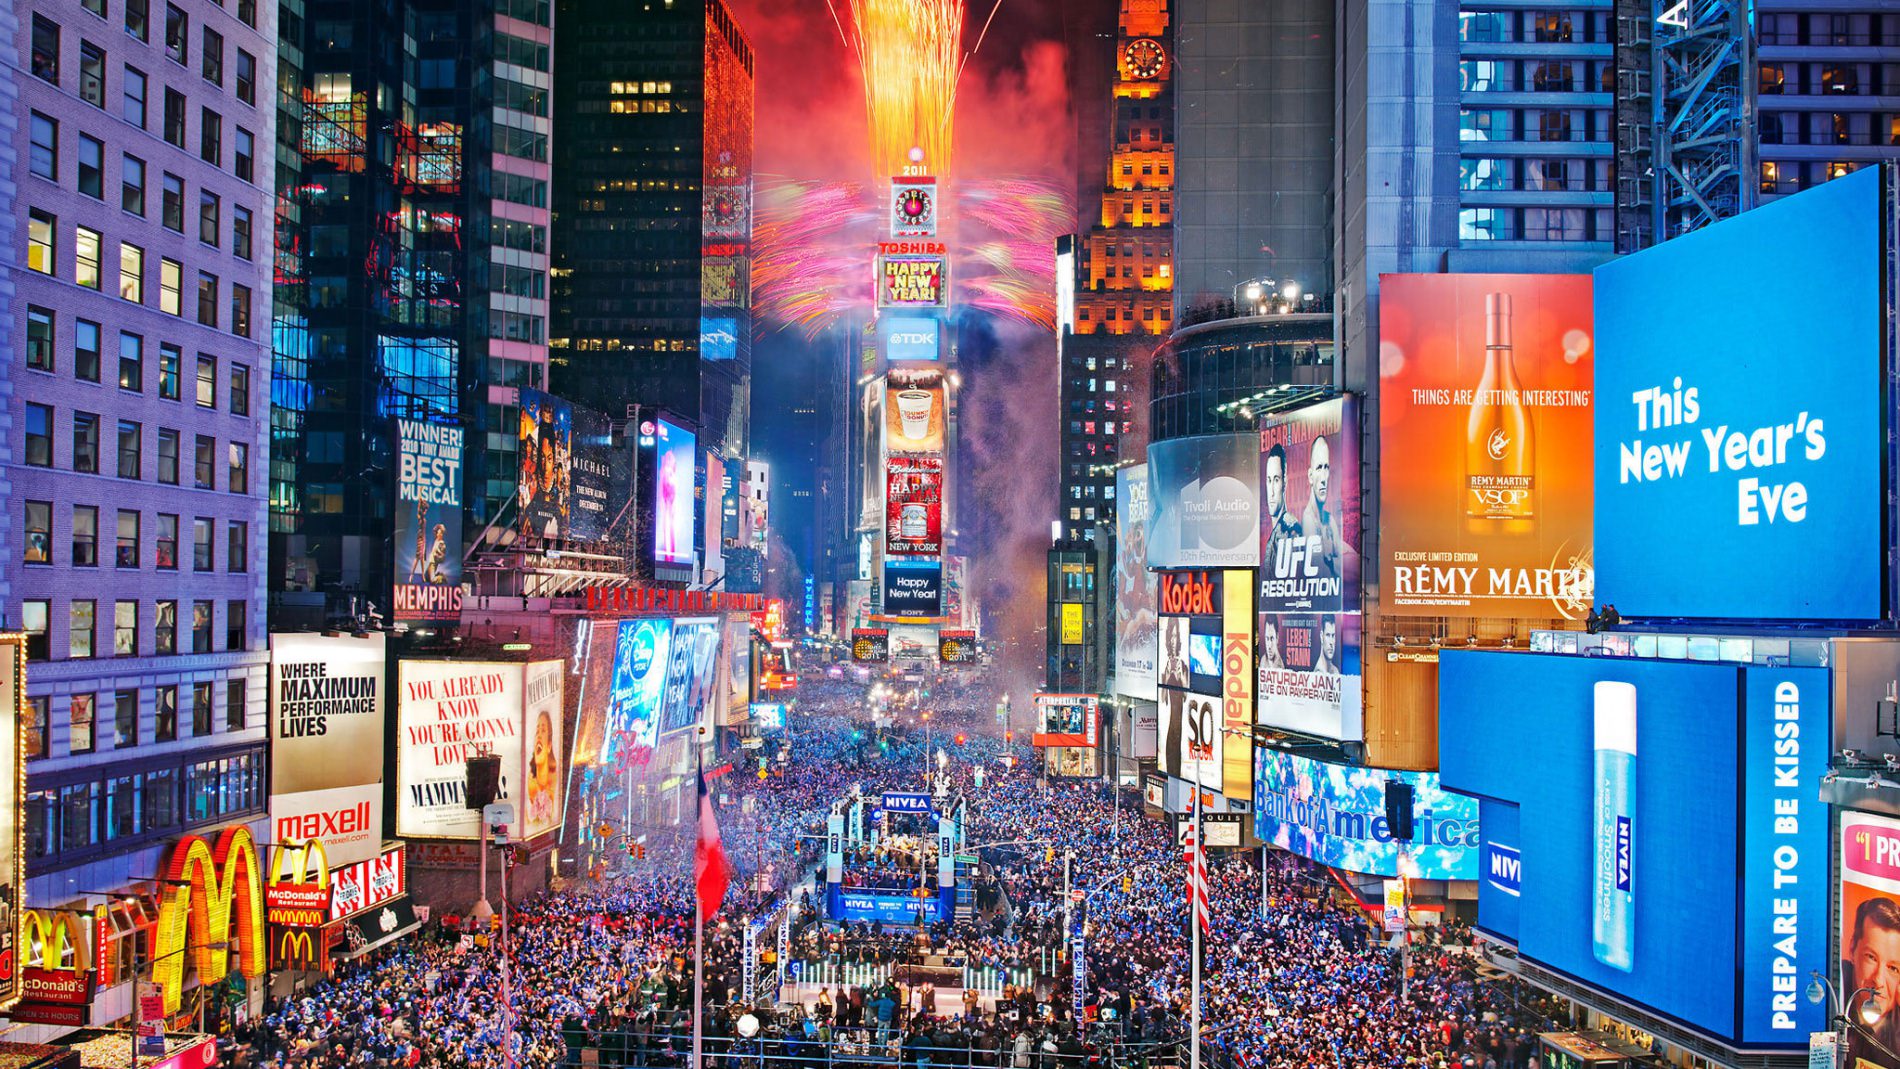 NYPD will ball drop at Times Square